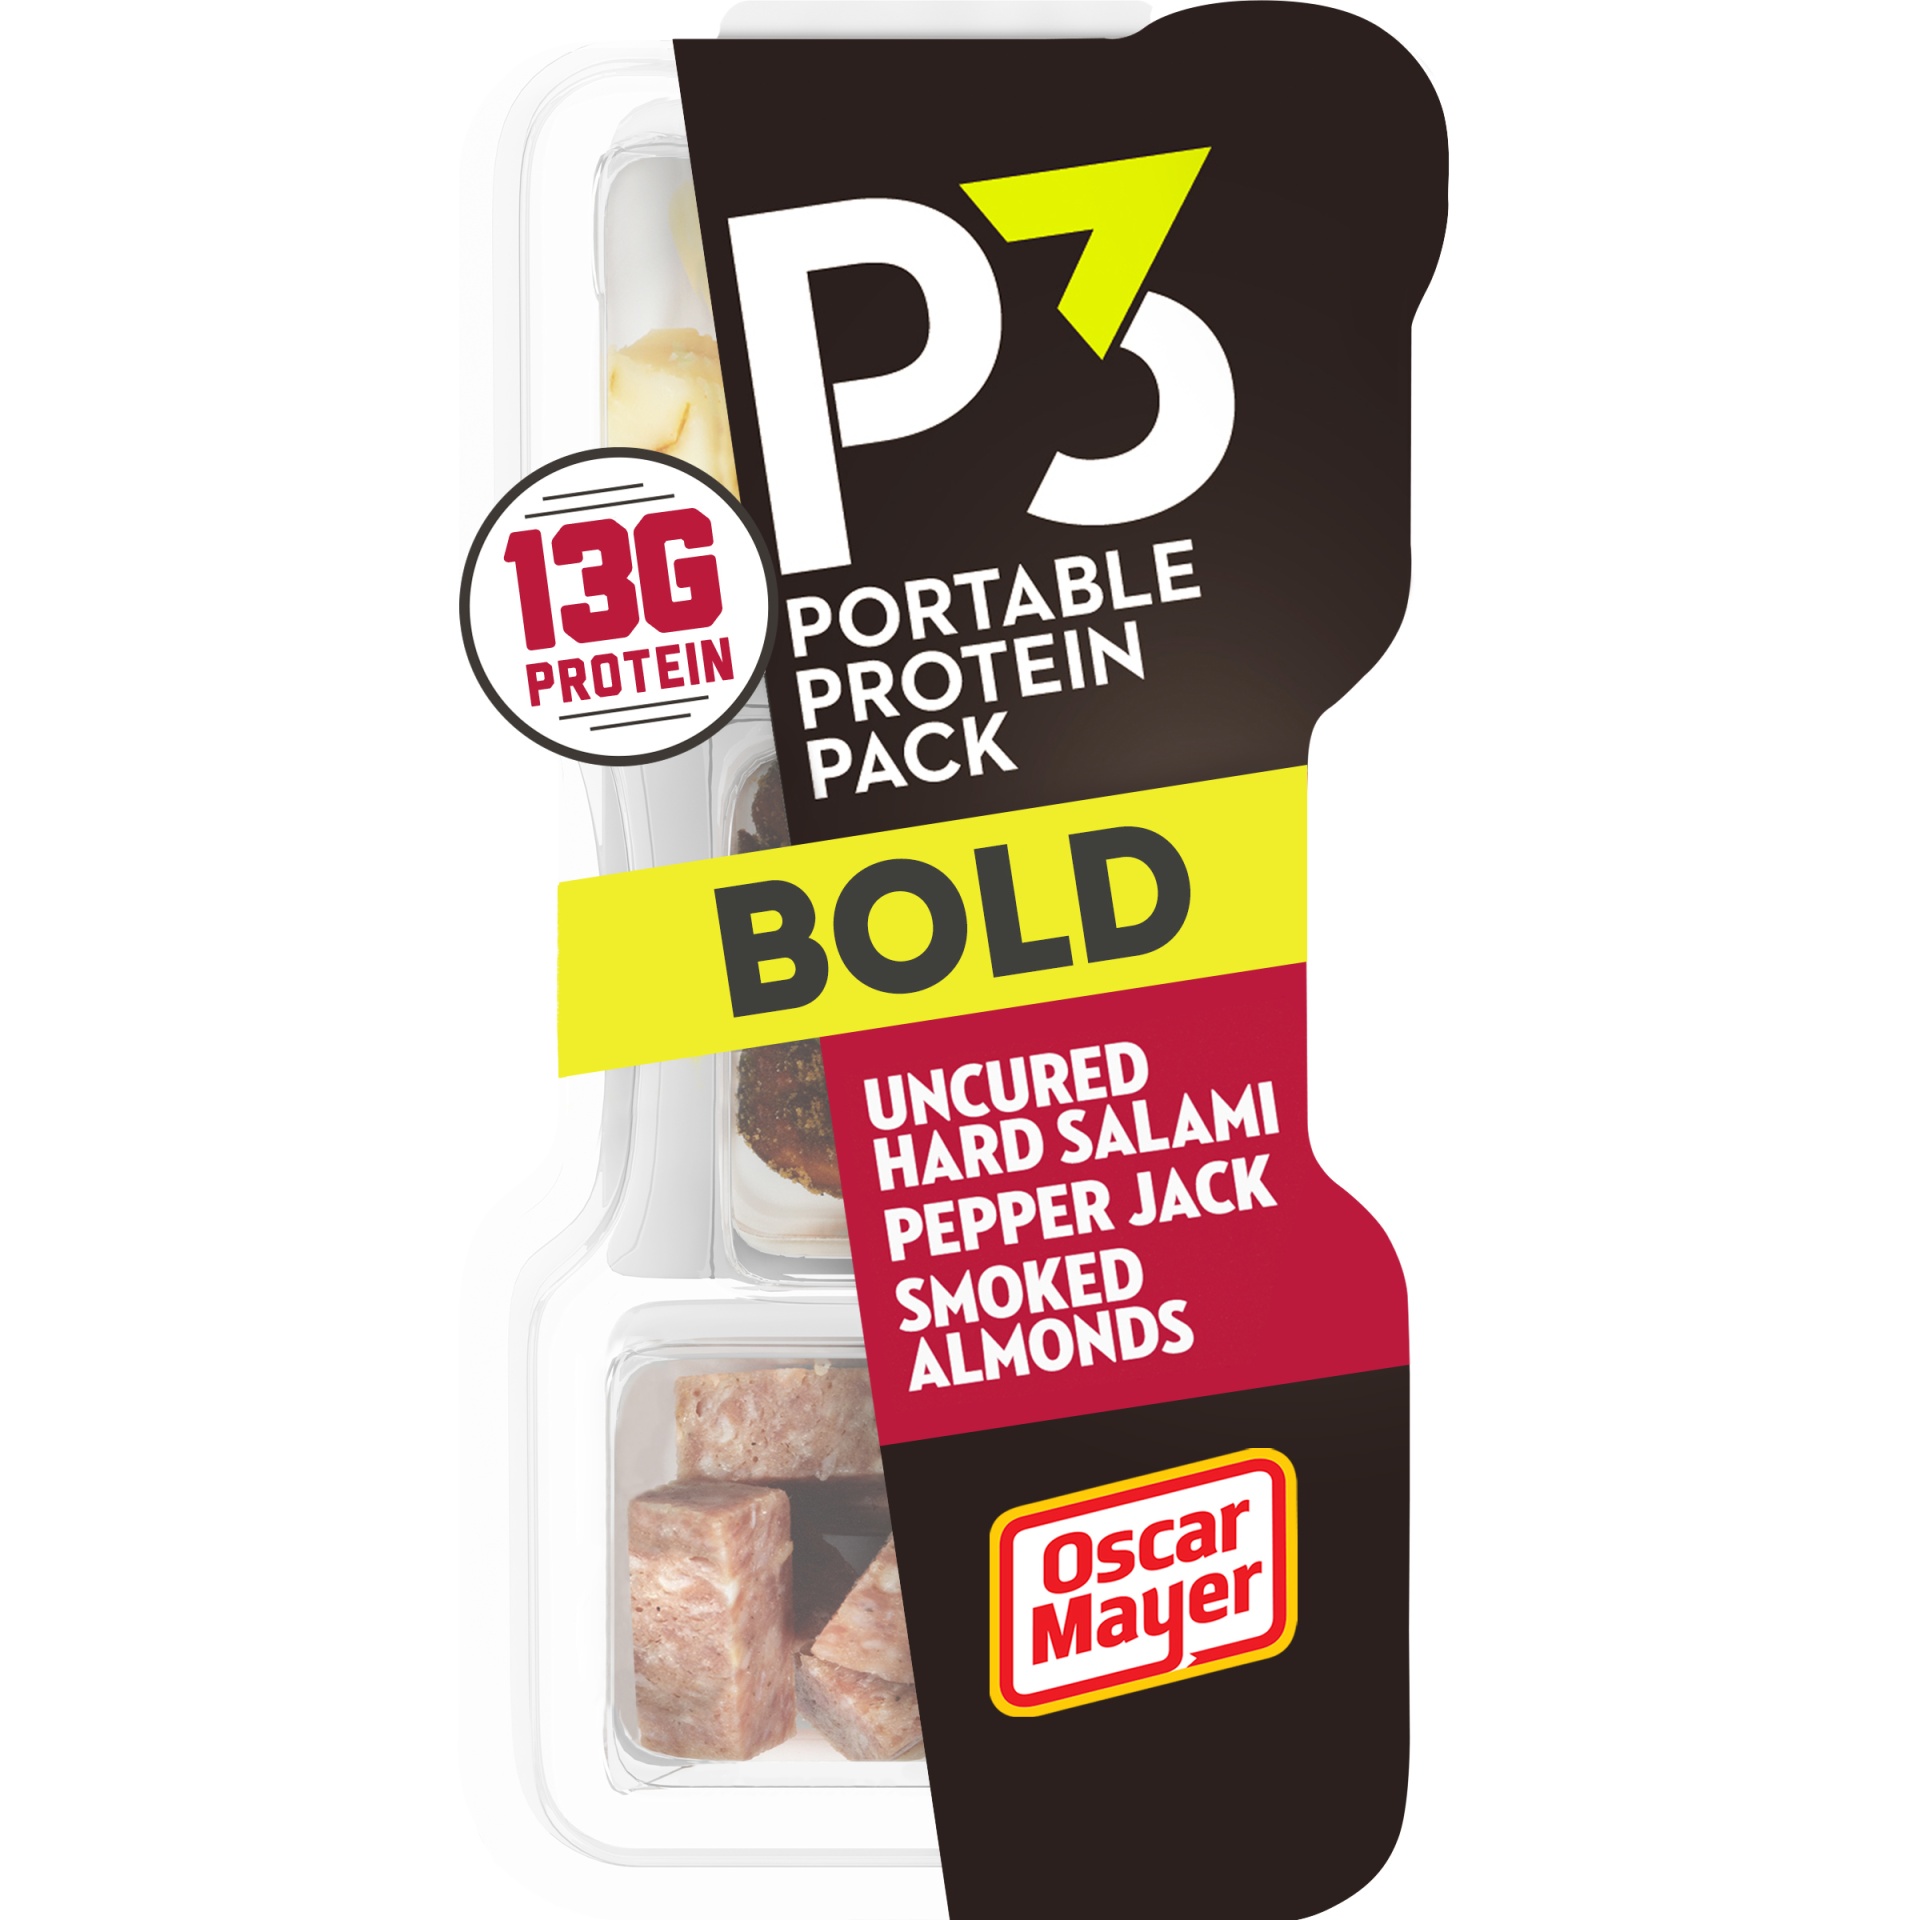 slide 1 of 6, P3 Bold Portable Protein Snack Pack with Uncured Hard Salami, Pepper Jack Cheese & Smoked Almonds Tray, 2 oz